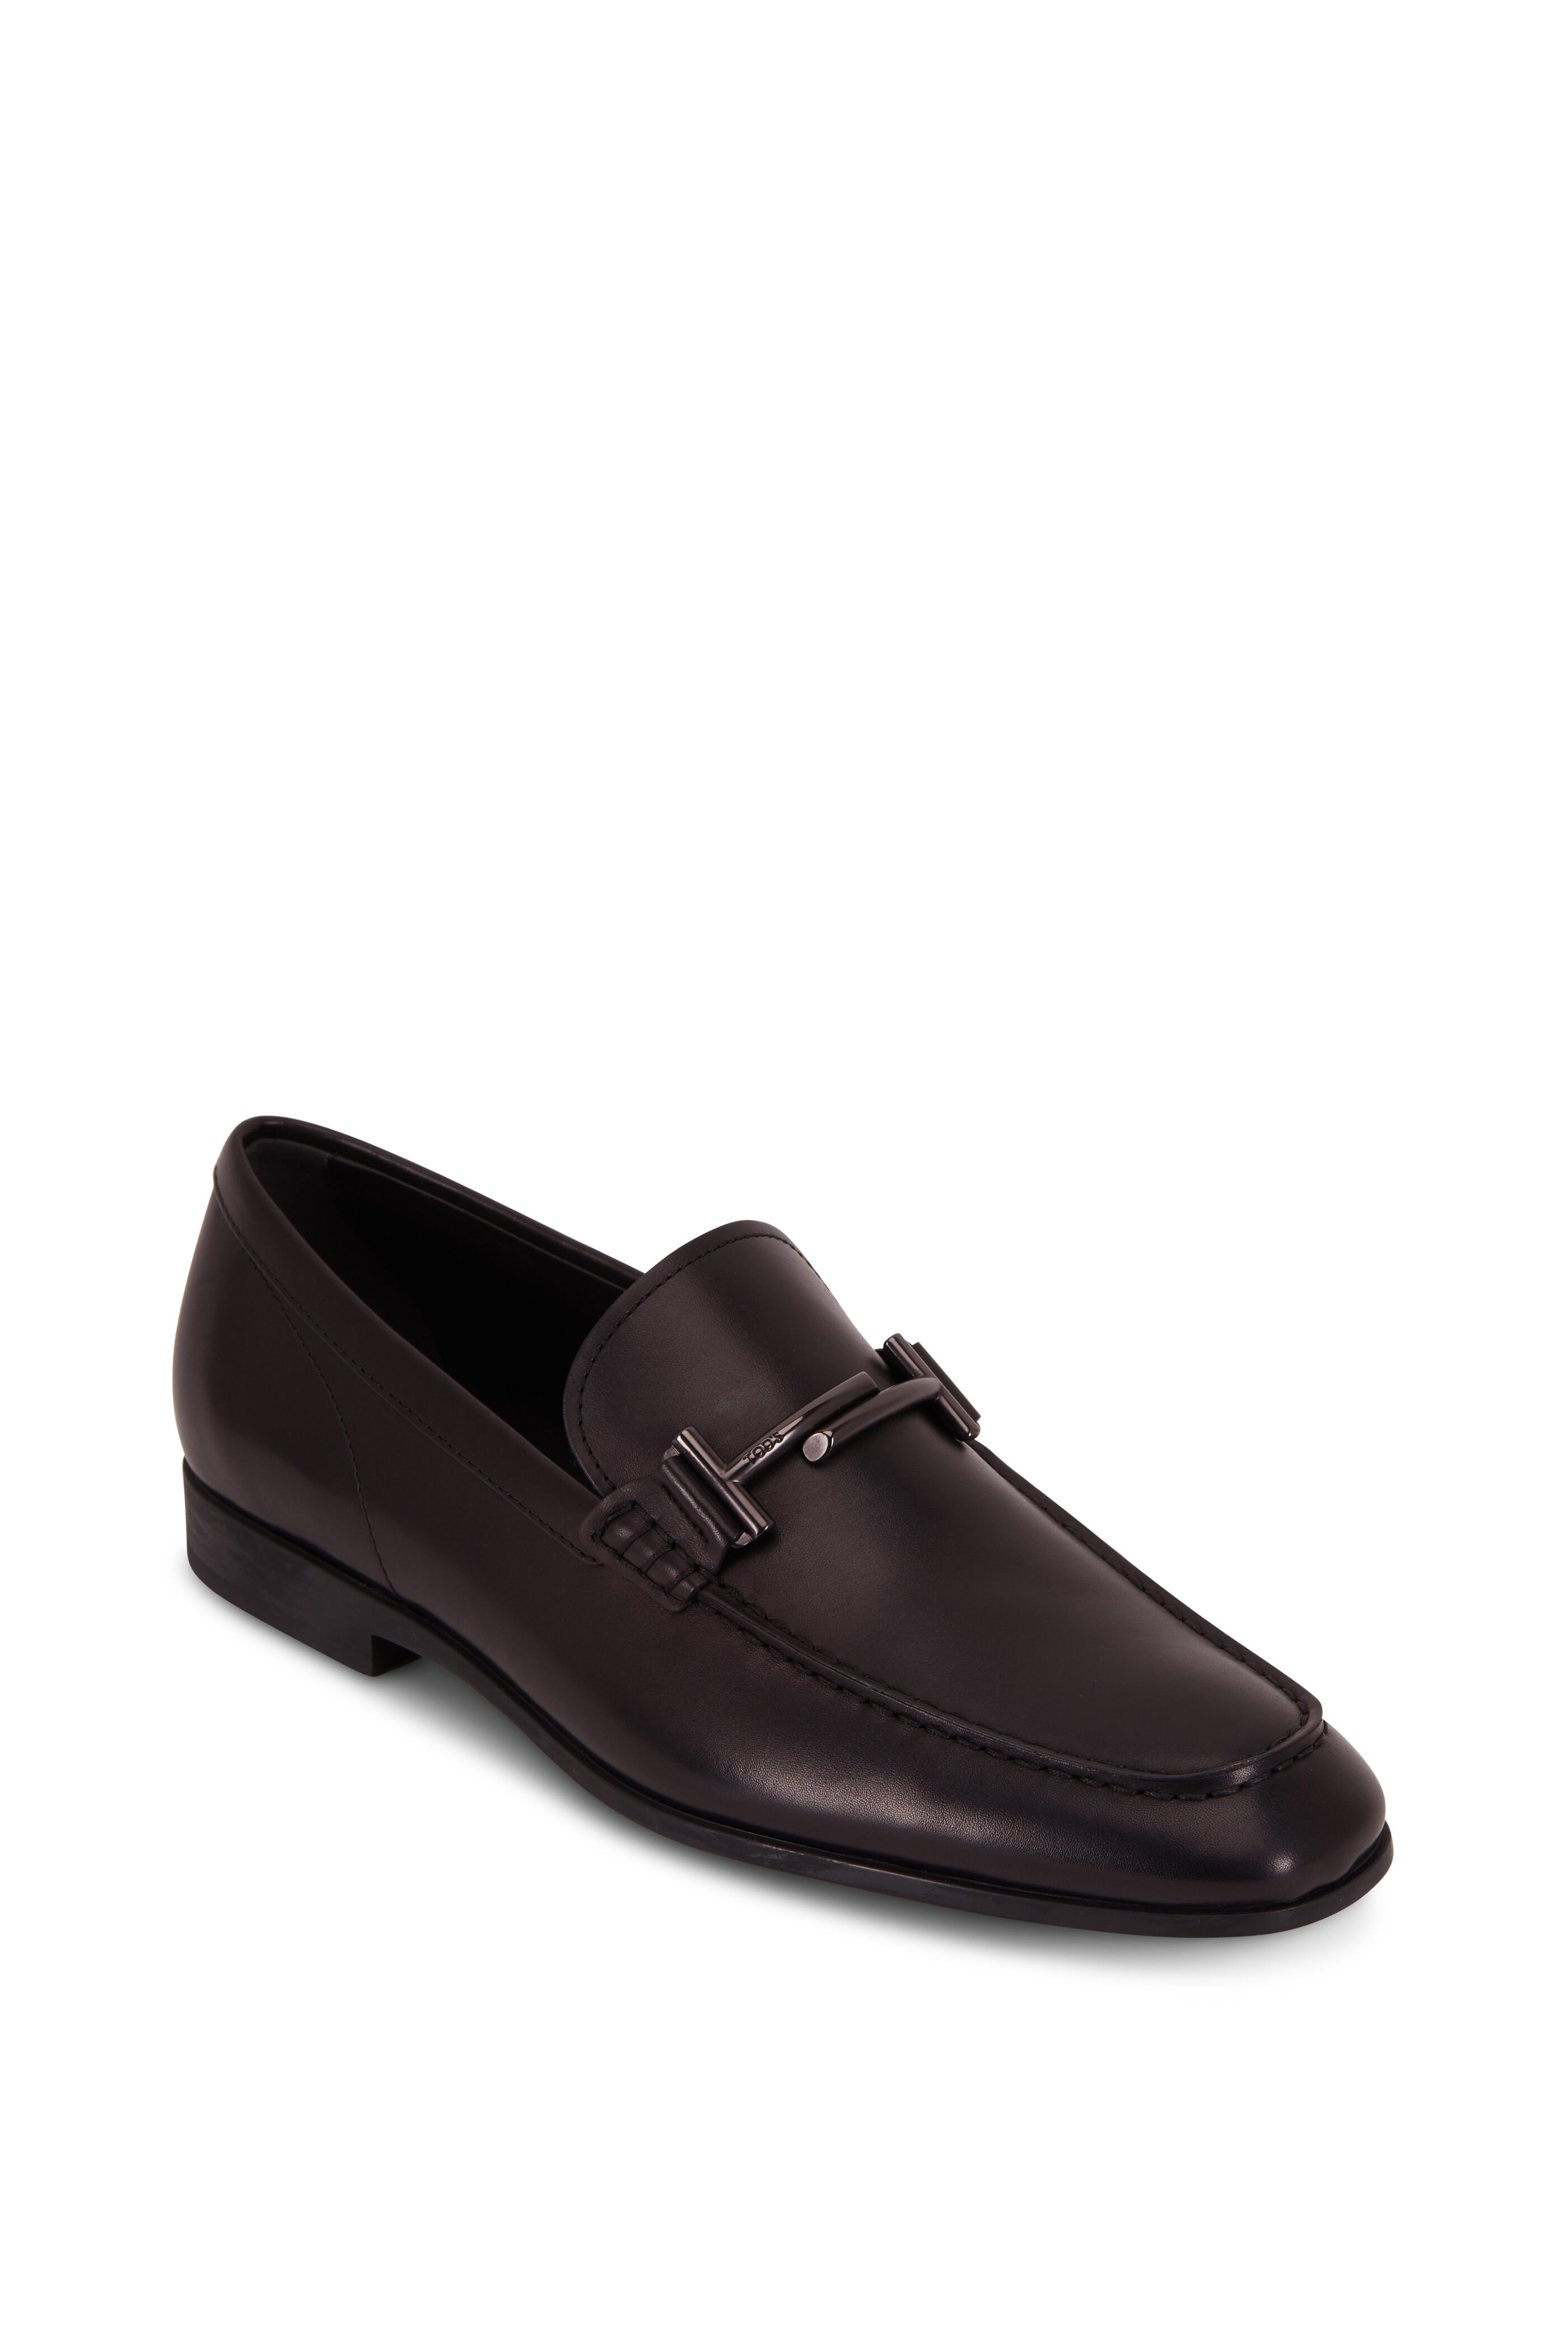 Tod's - Doppia Double T Black Leather Bit Loafer